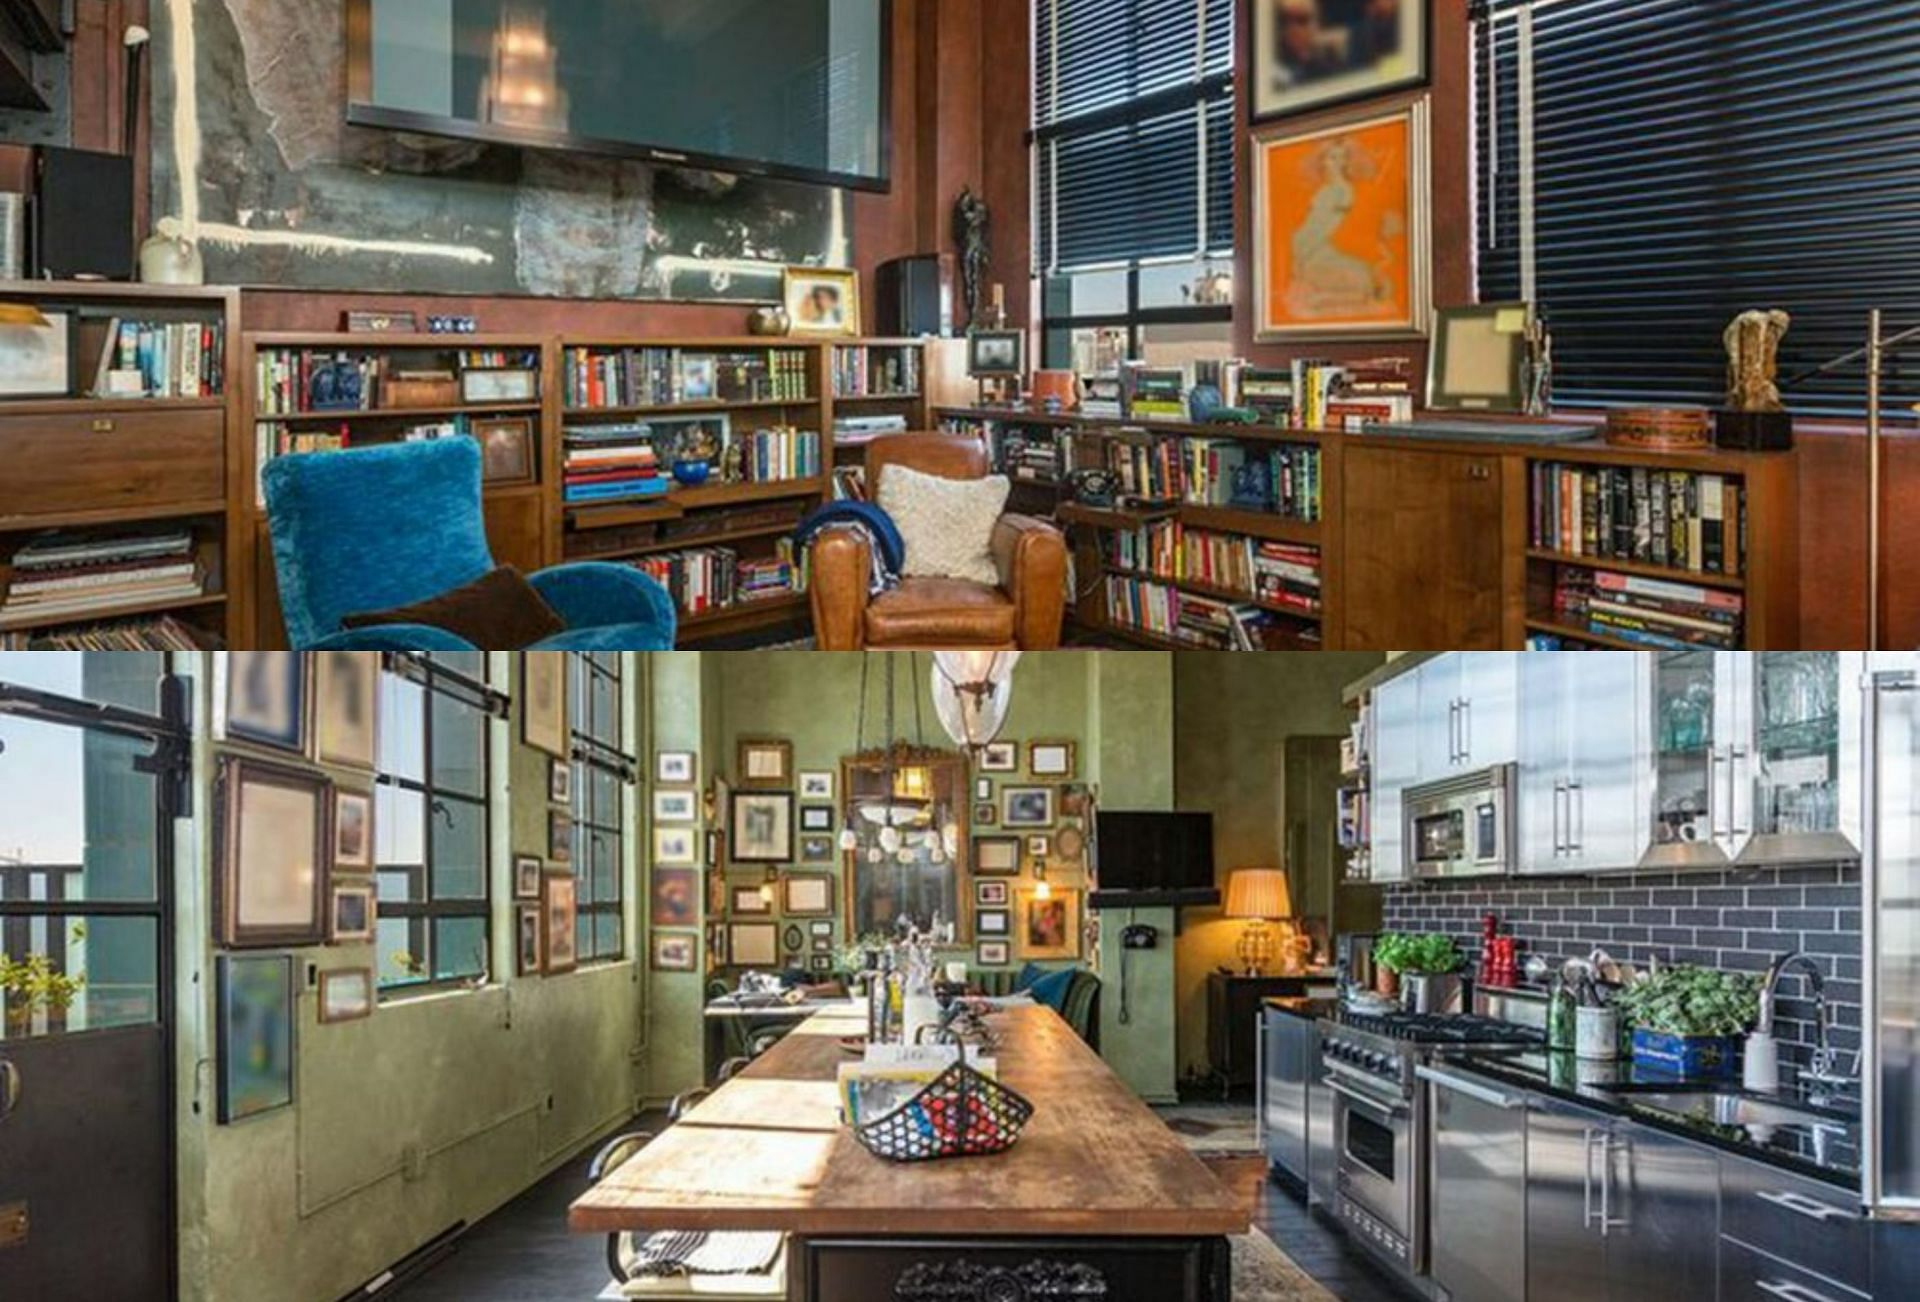 Johnny Depp and Amber Heard&#039;s penthouse when they resided in it (Image via Jam Press)